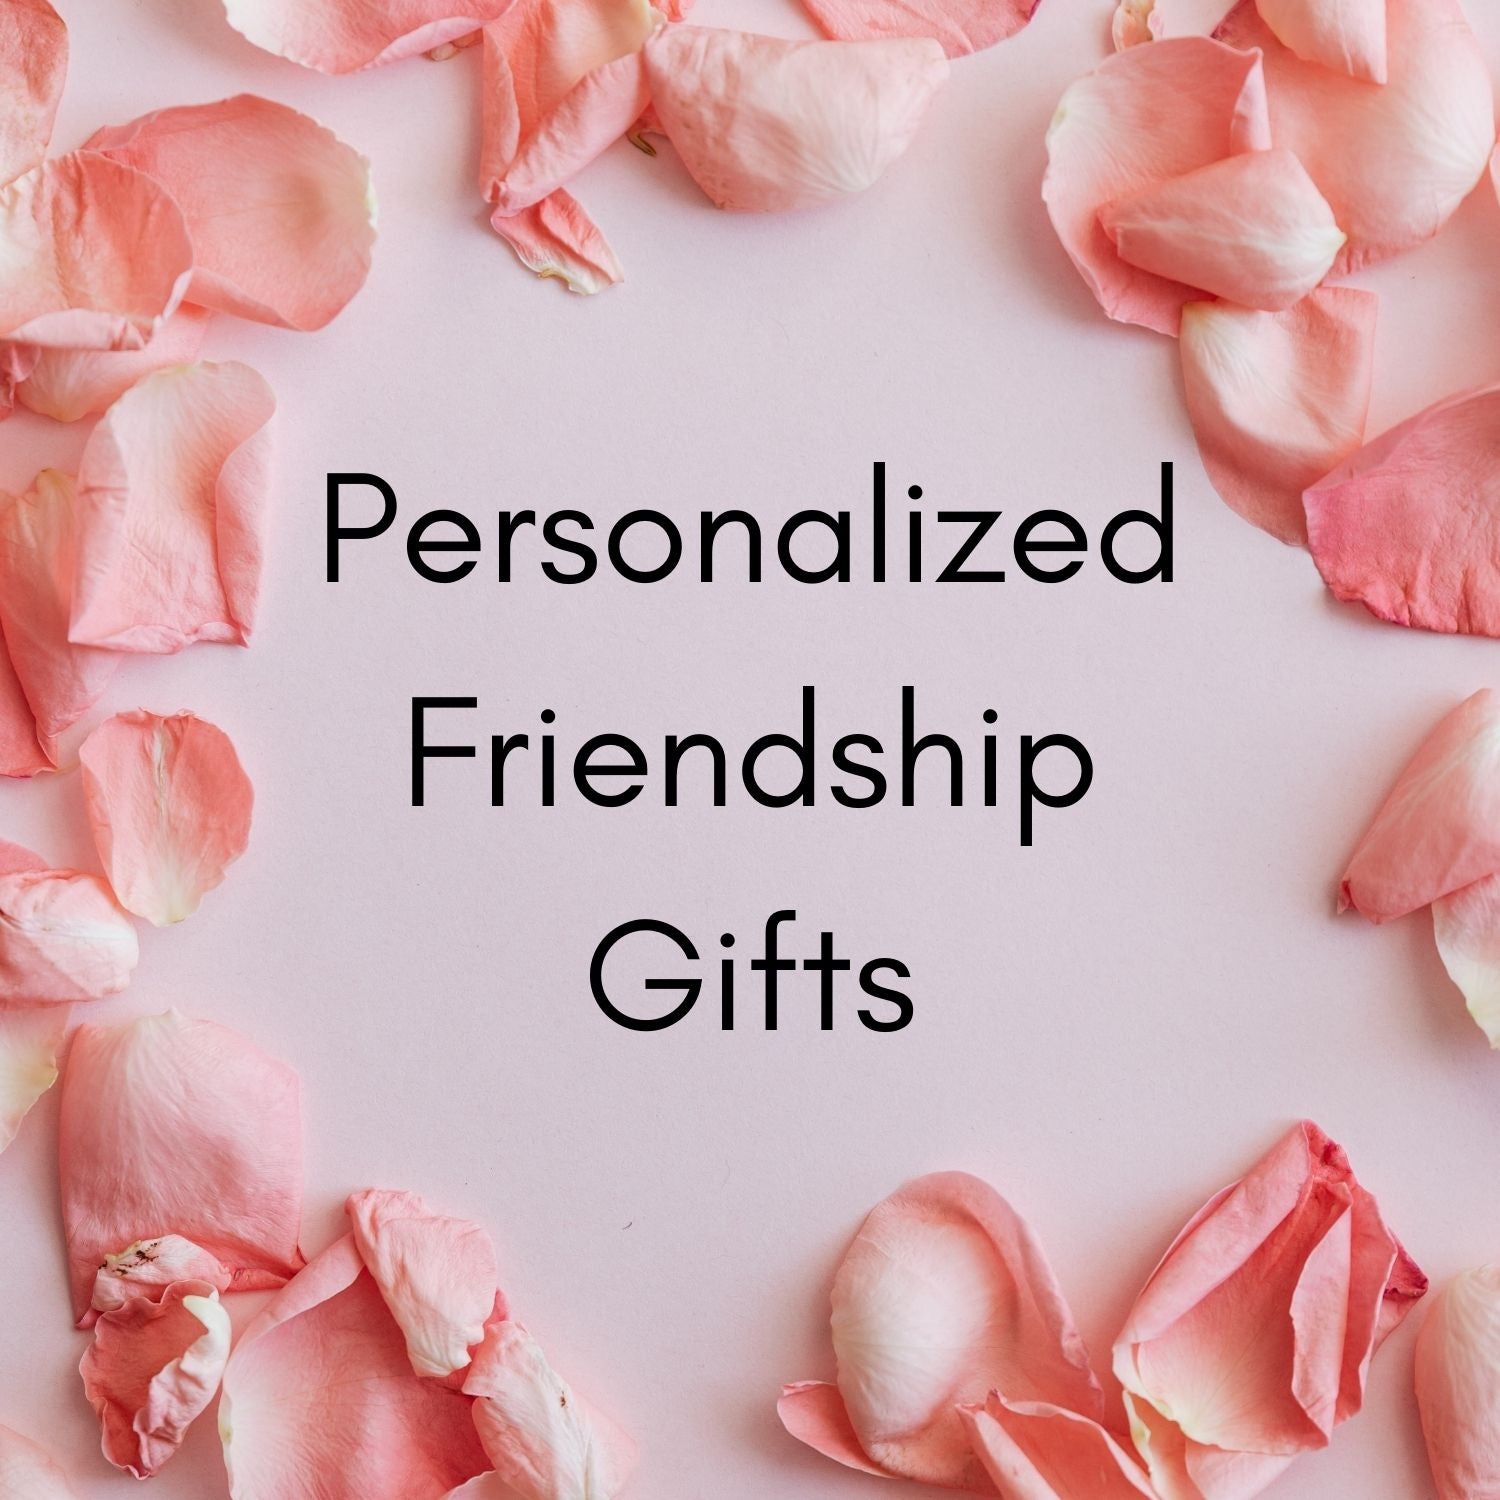 Personalized Friendship Gifts